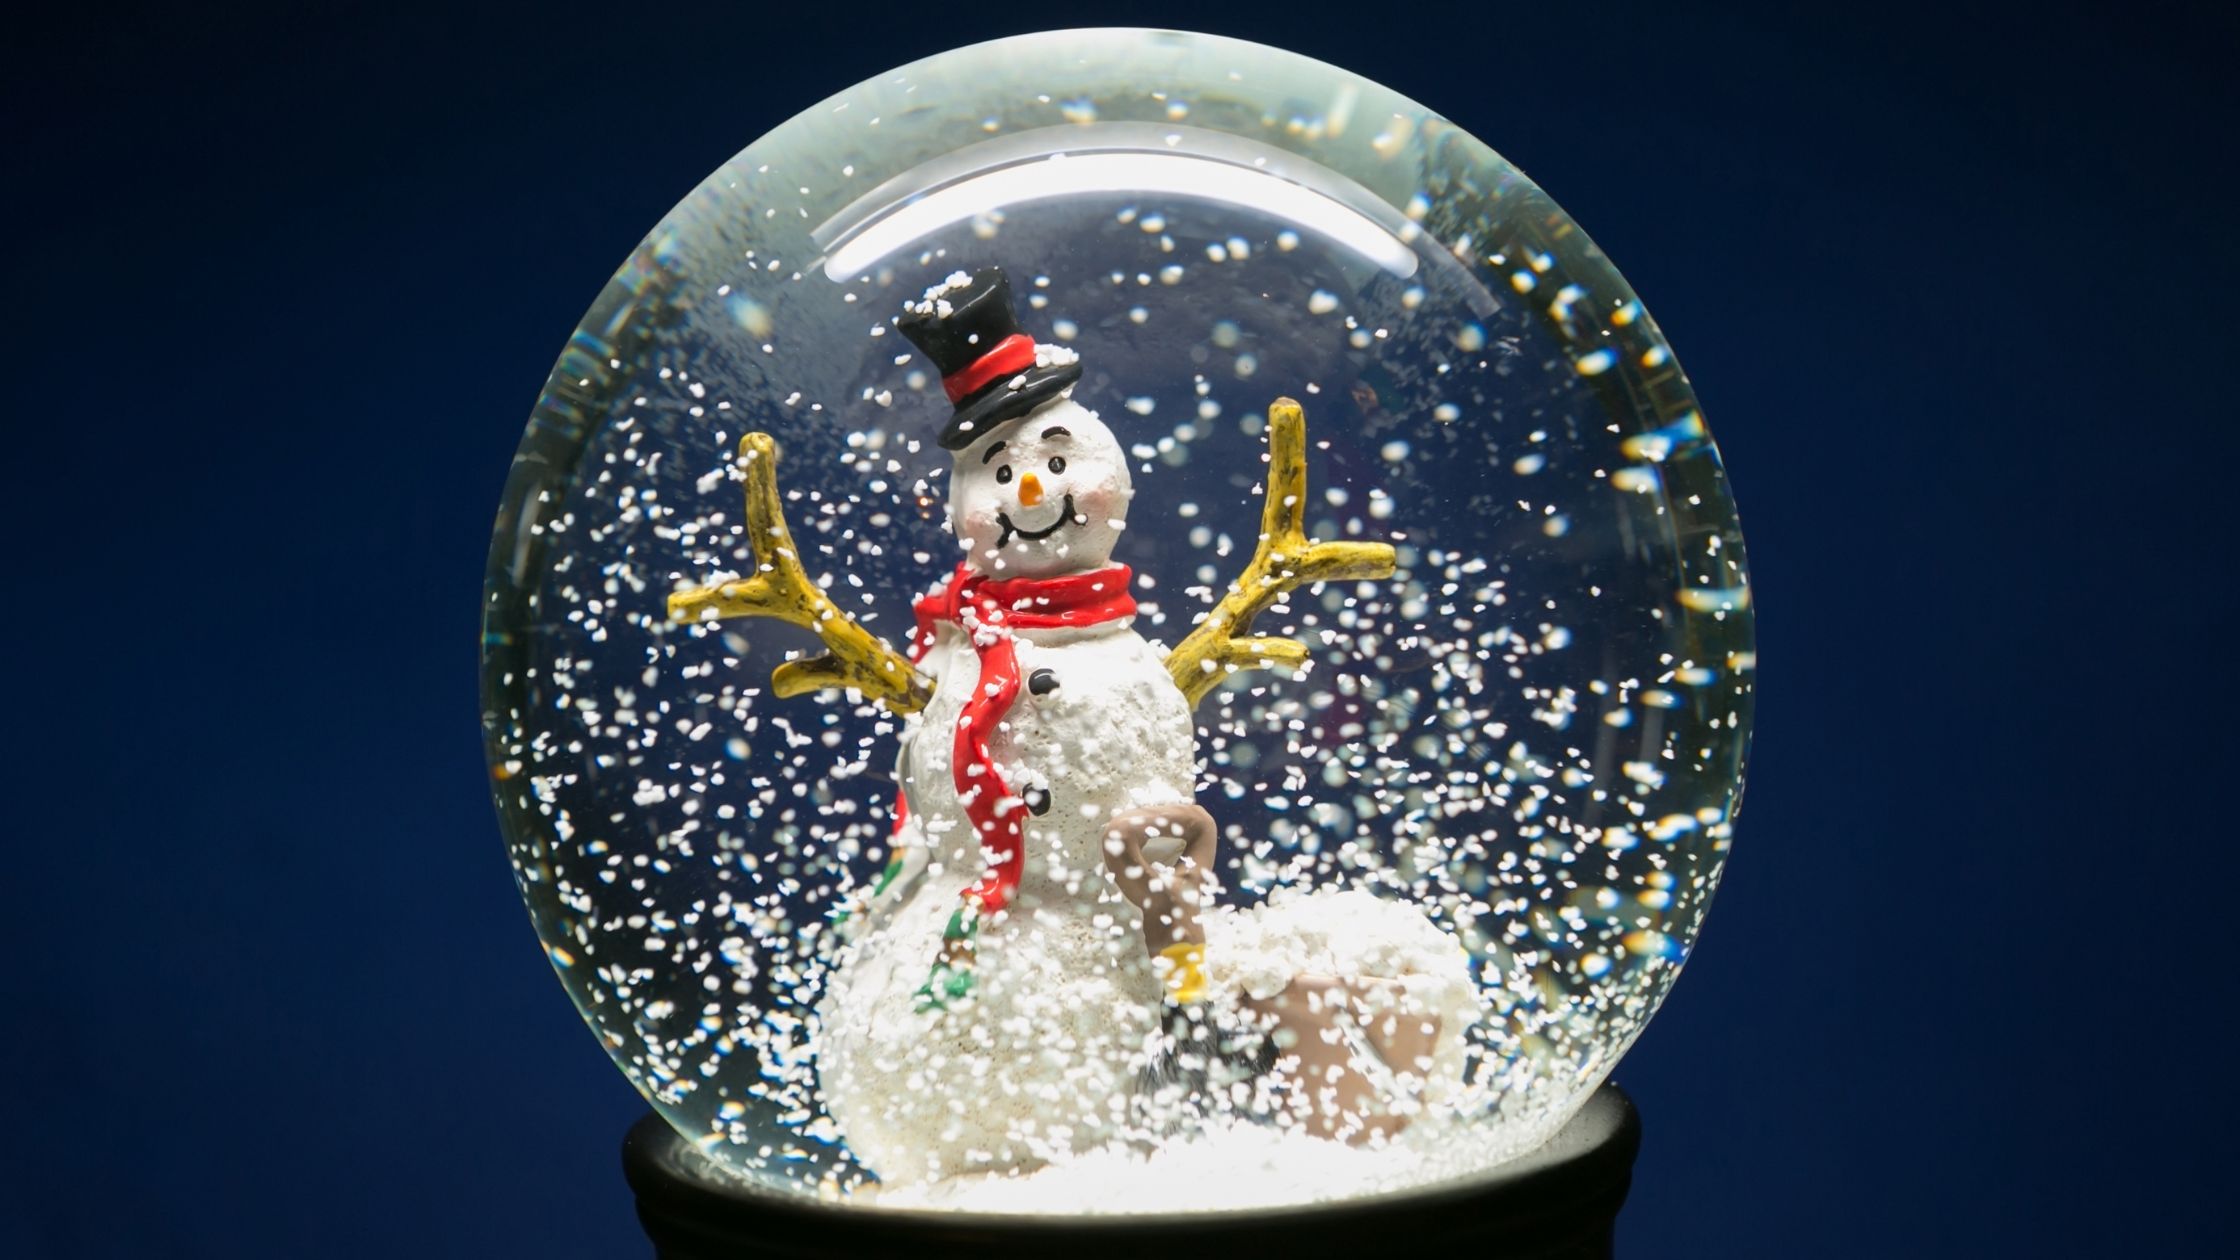 What’s inside a snow globe inflatable Christmas decoration? You won’t believe what we found!